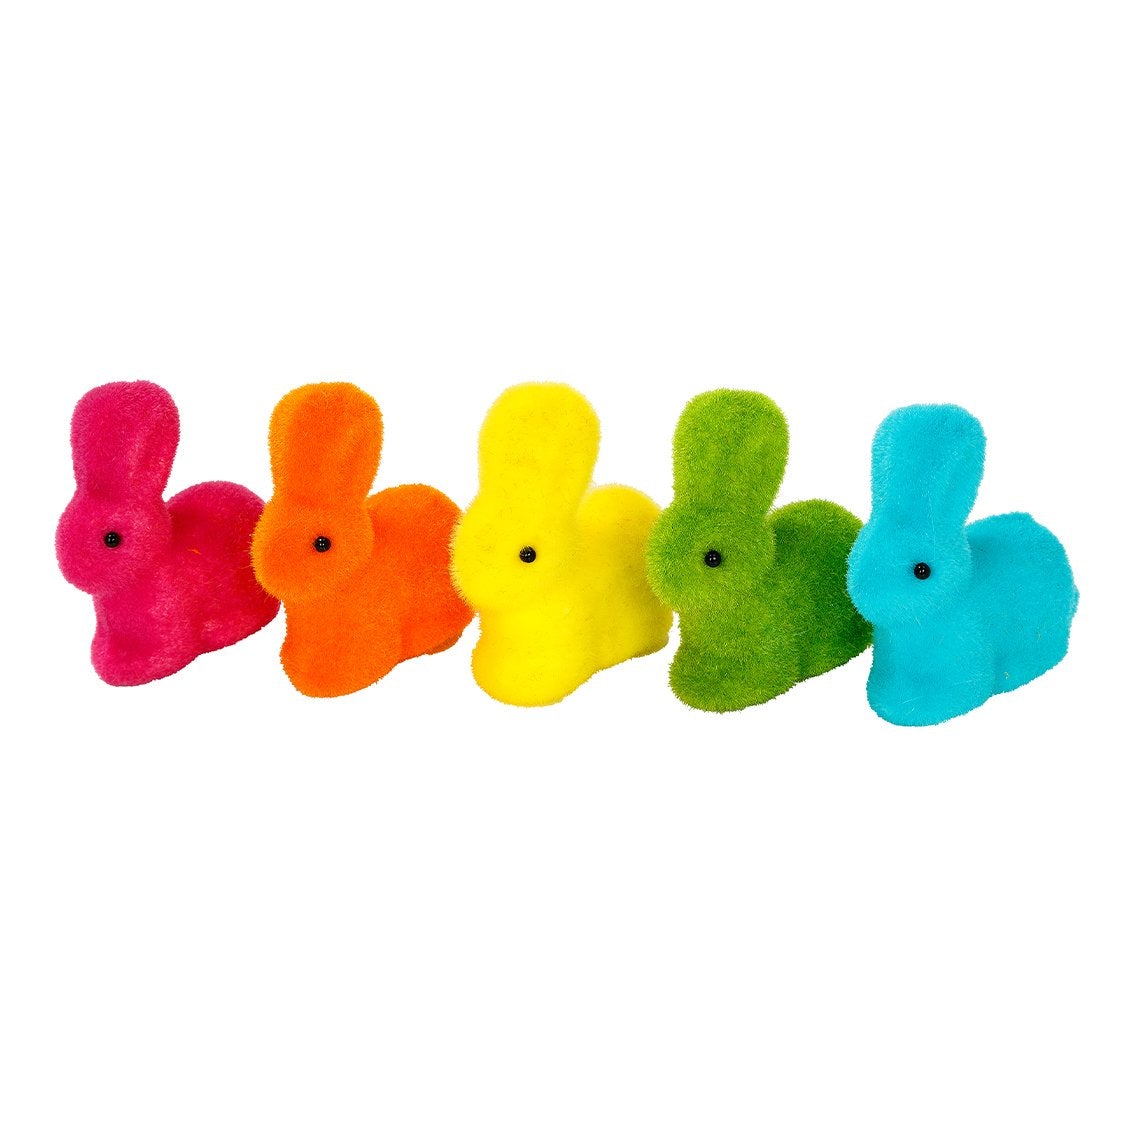 Pack of 5 Rainbow Easter Bunny Decorations - Talking Tables UK